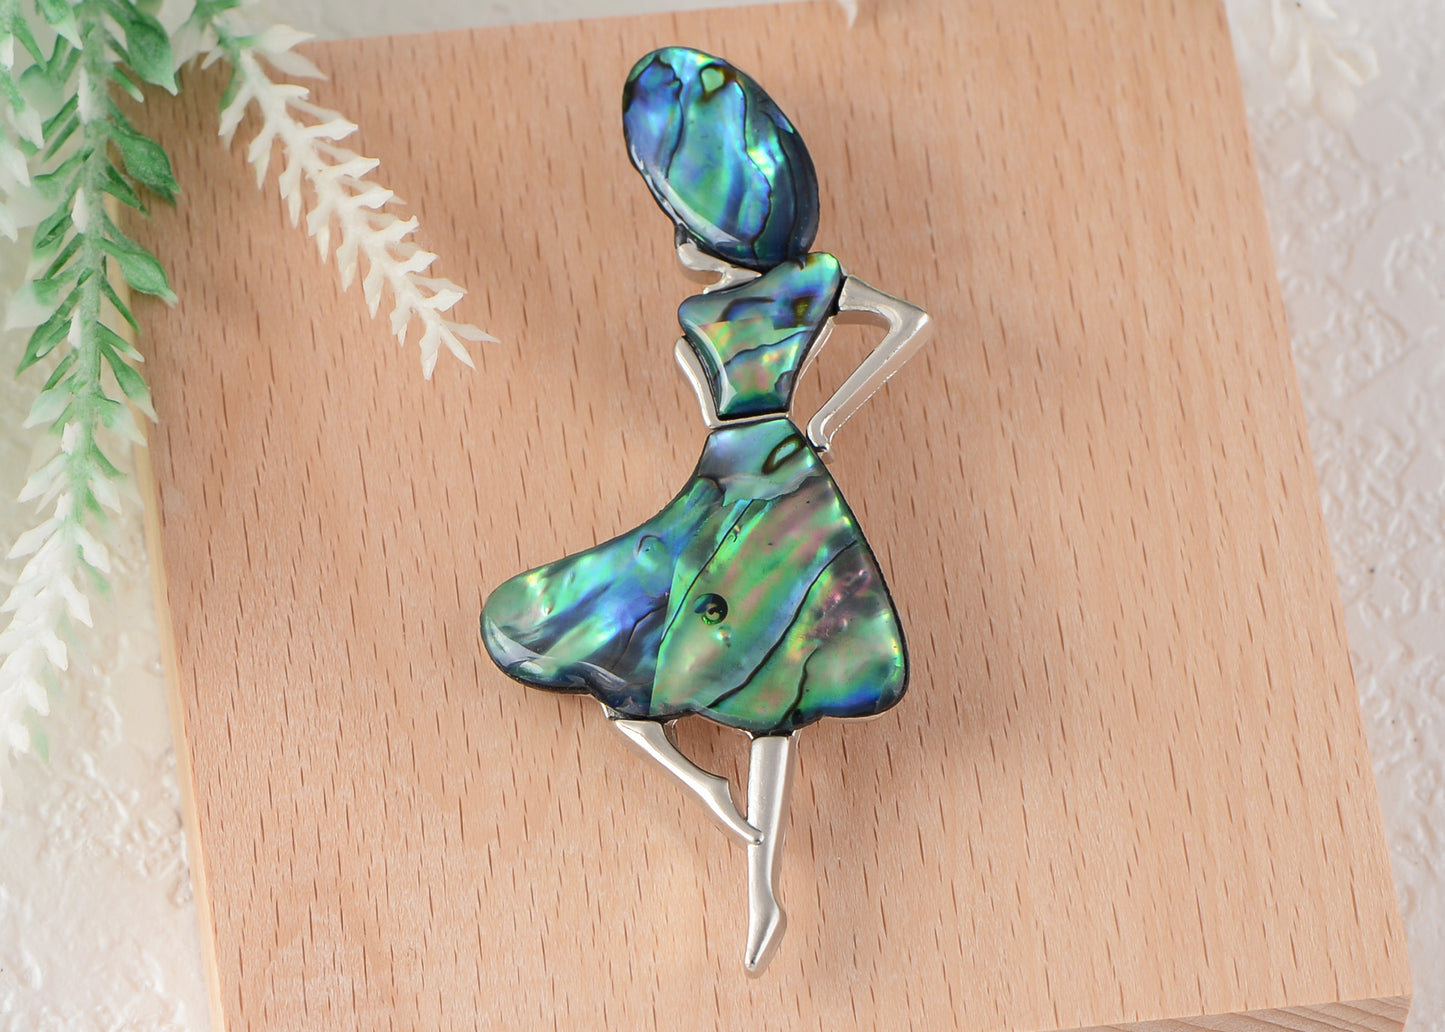 Alilang Dancer Girl Natural Abalone Shell Sliver Tone Alloy Brooch Pin Necklace Pendant